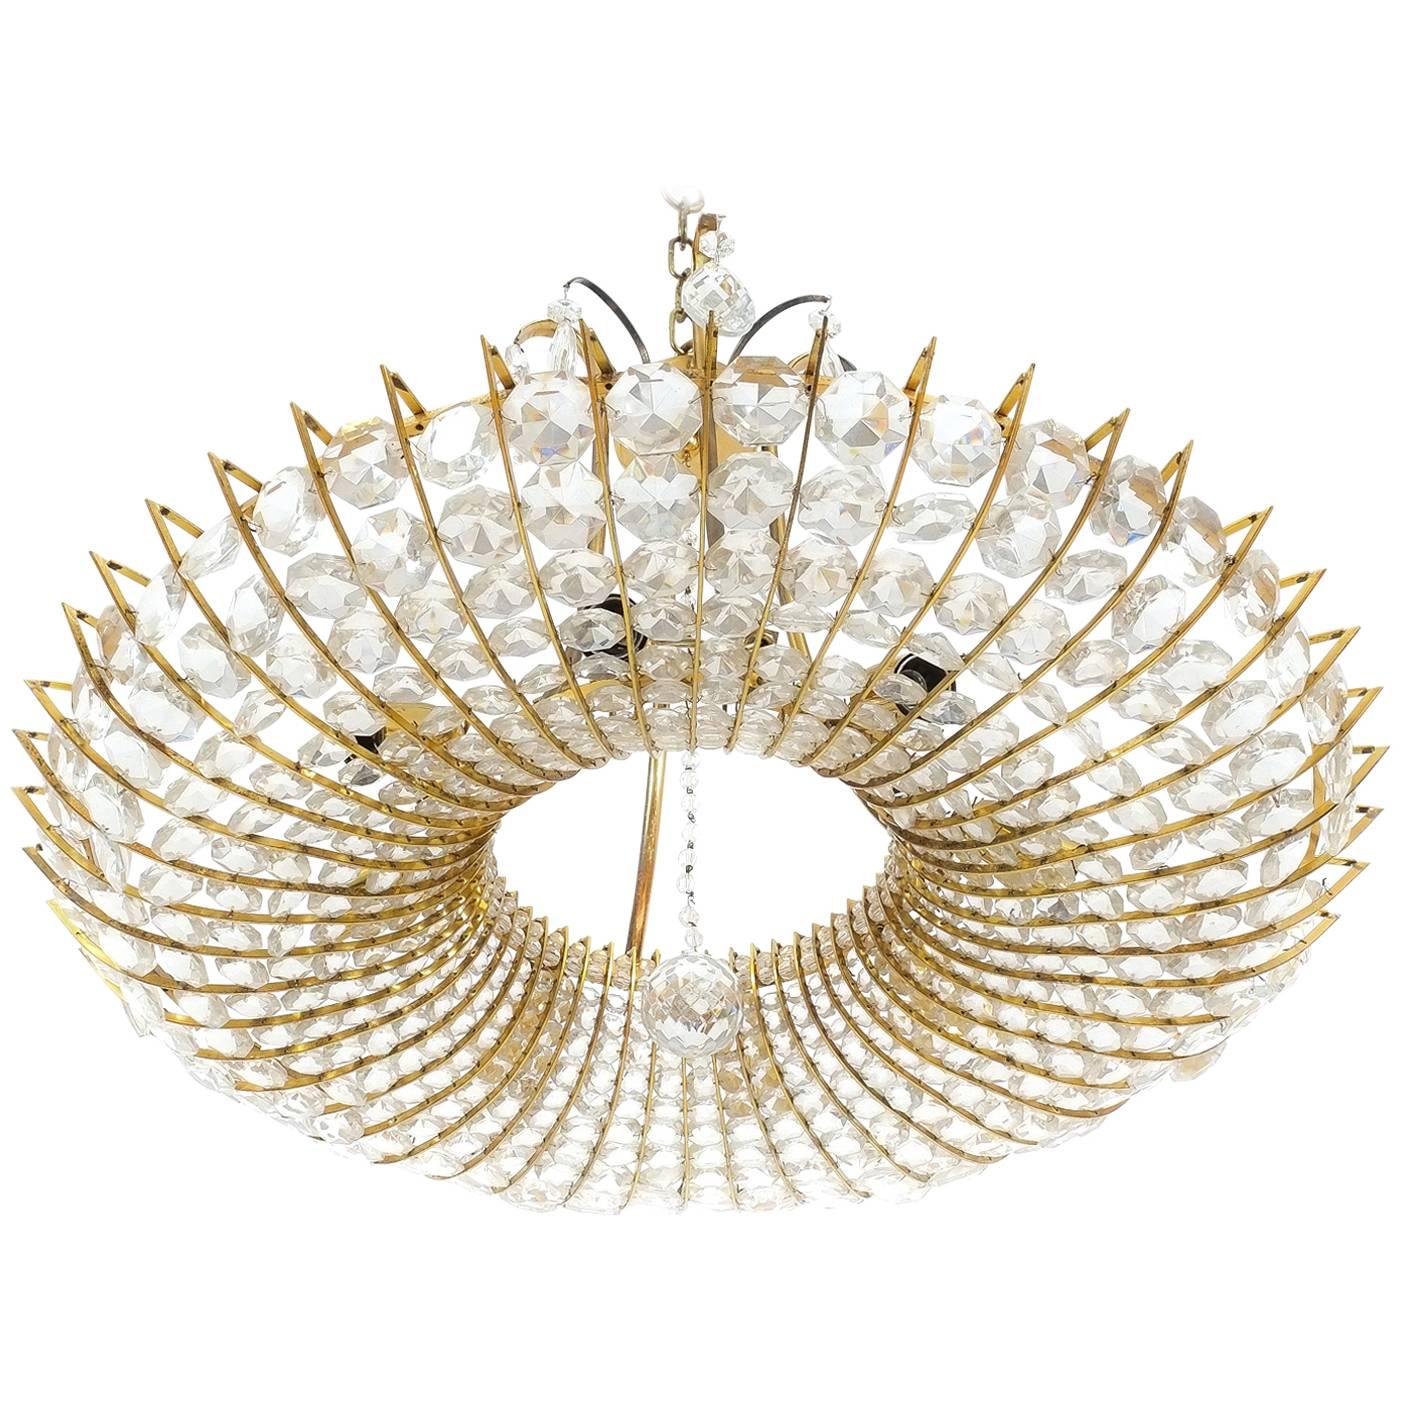 Large brass and crystal chandelier in the style of Lobmeyr, circa 1960

Beautiful Austrian 26